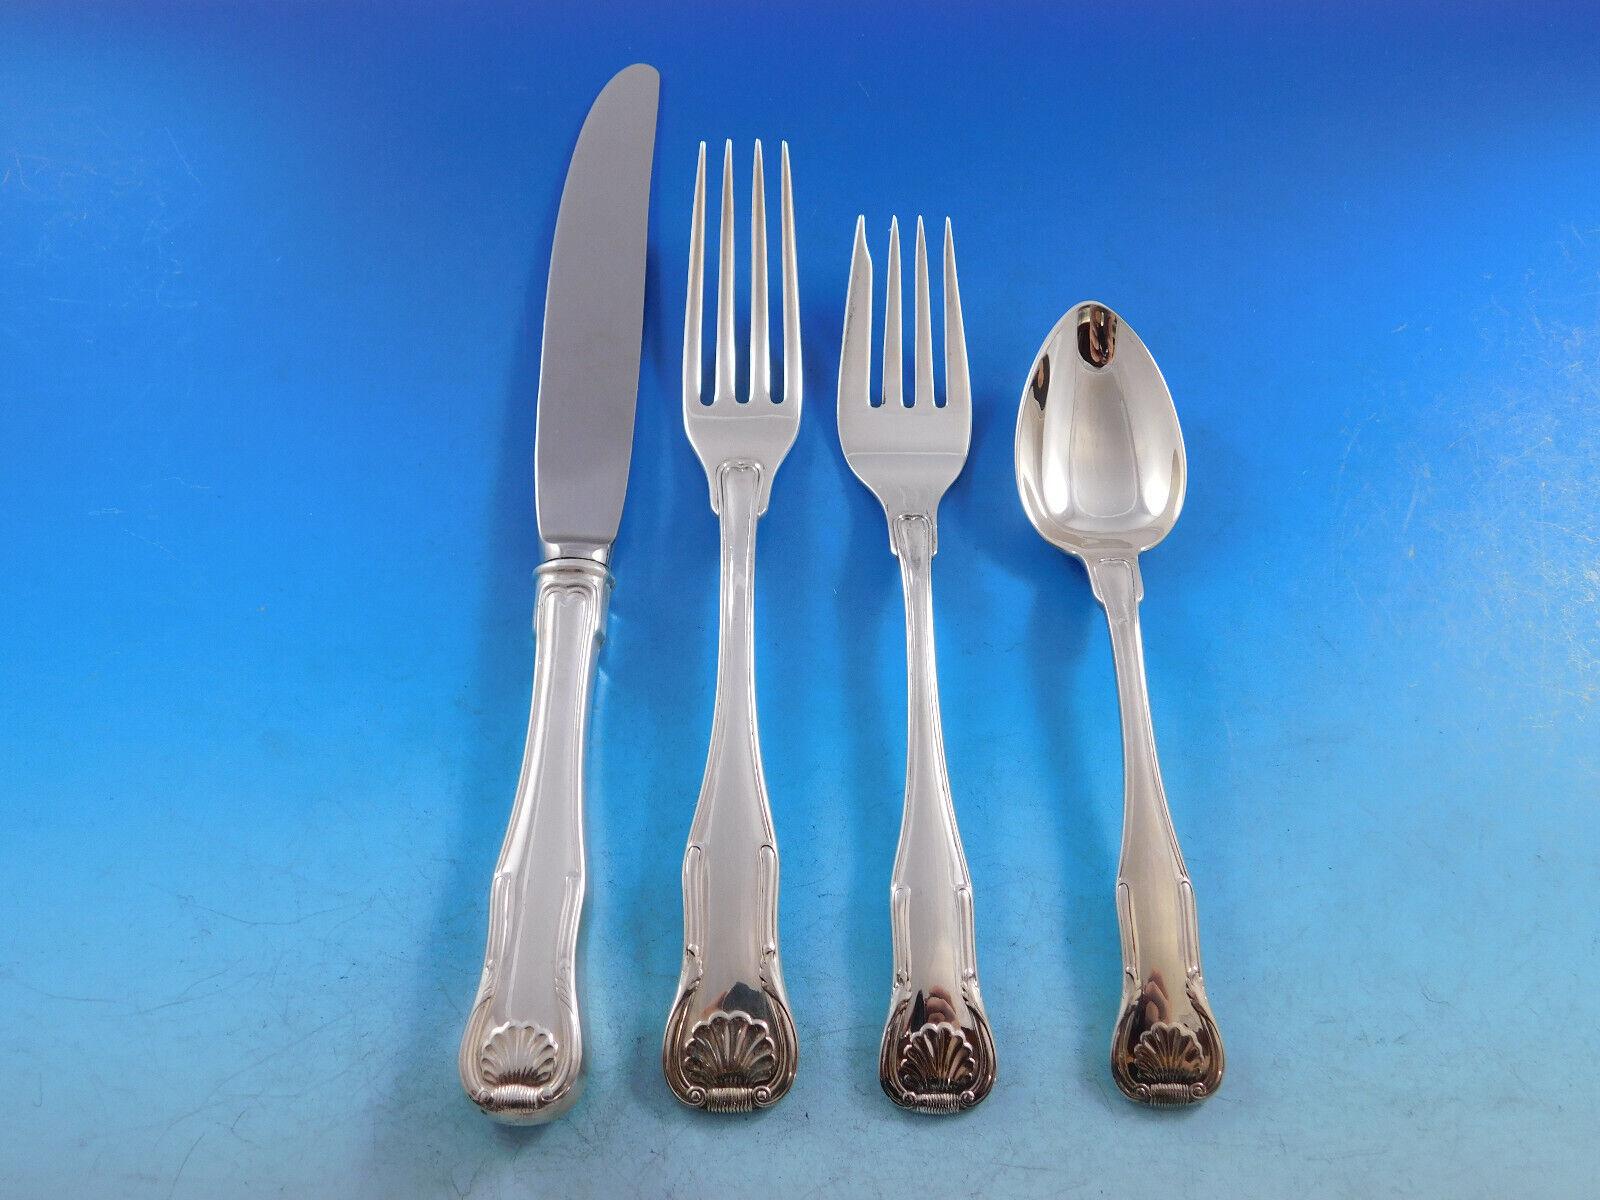 King by Kirk-Stieff Sterling Silver Flatware set - 42 pieces. Kirk-Stieff's version of the traditional Kings-style places its emphasis on simplicity of design, and features an iconic shell motif. This set includes:

8 Knives w/French stainless